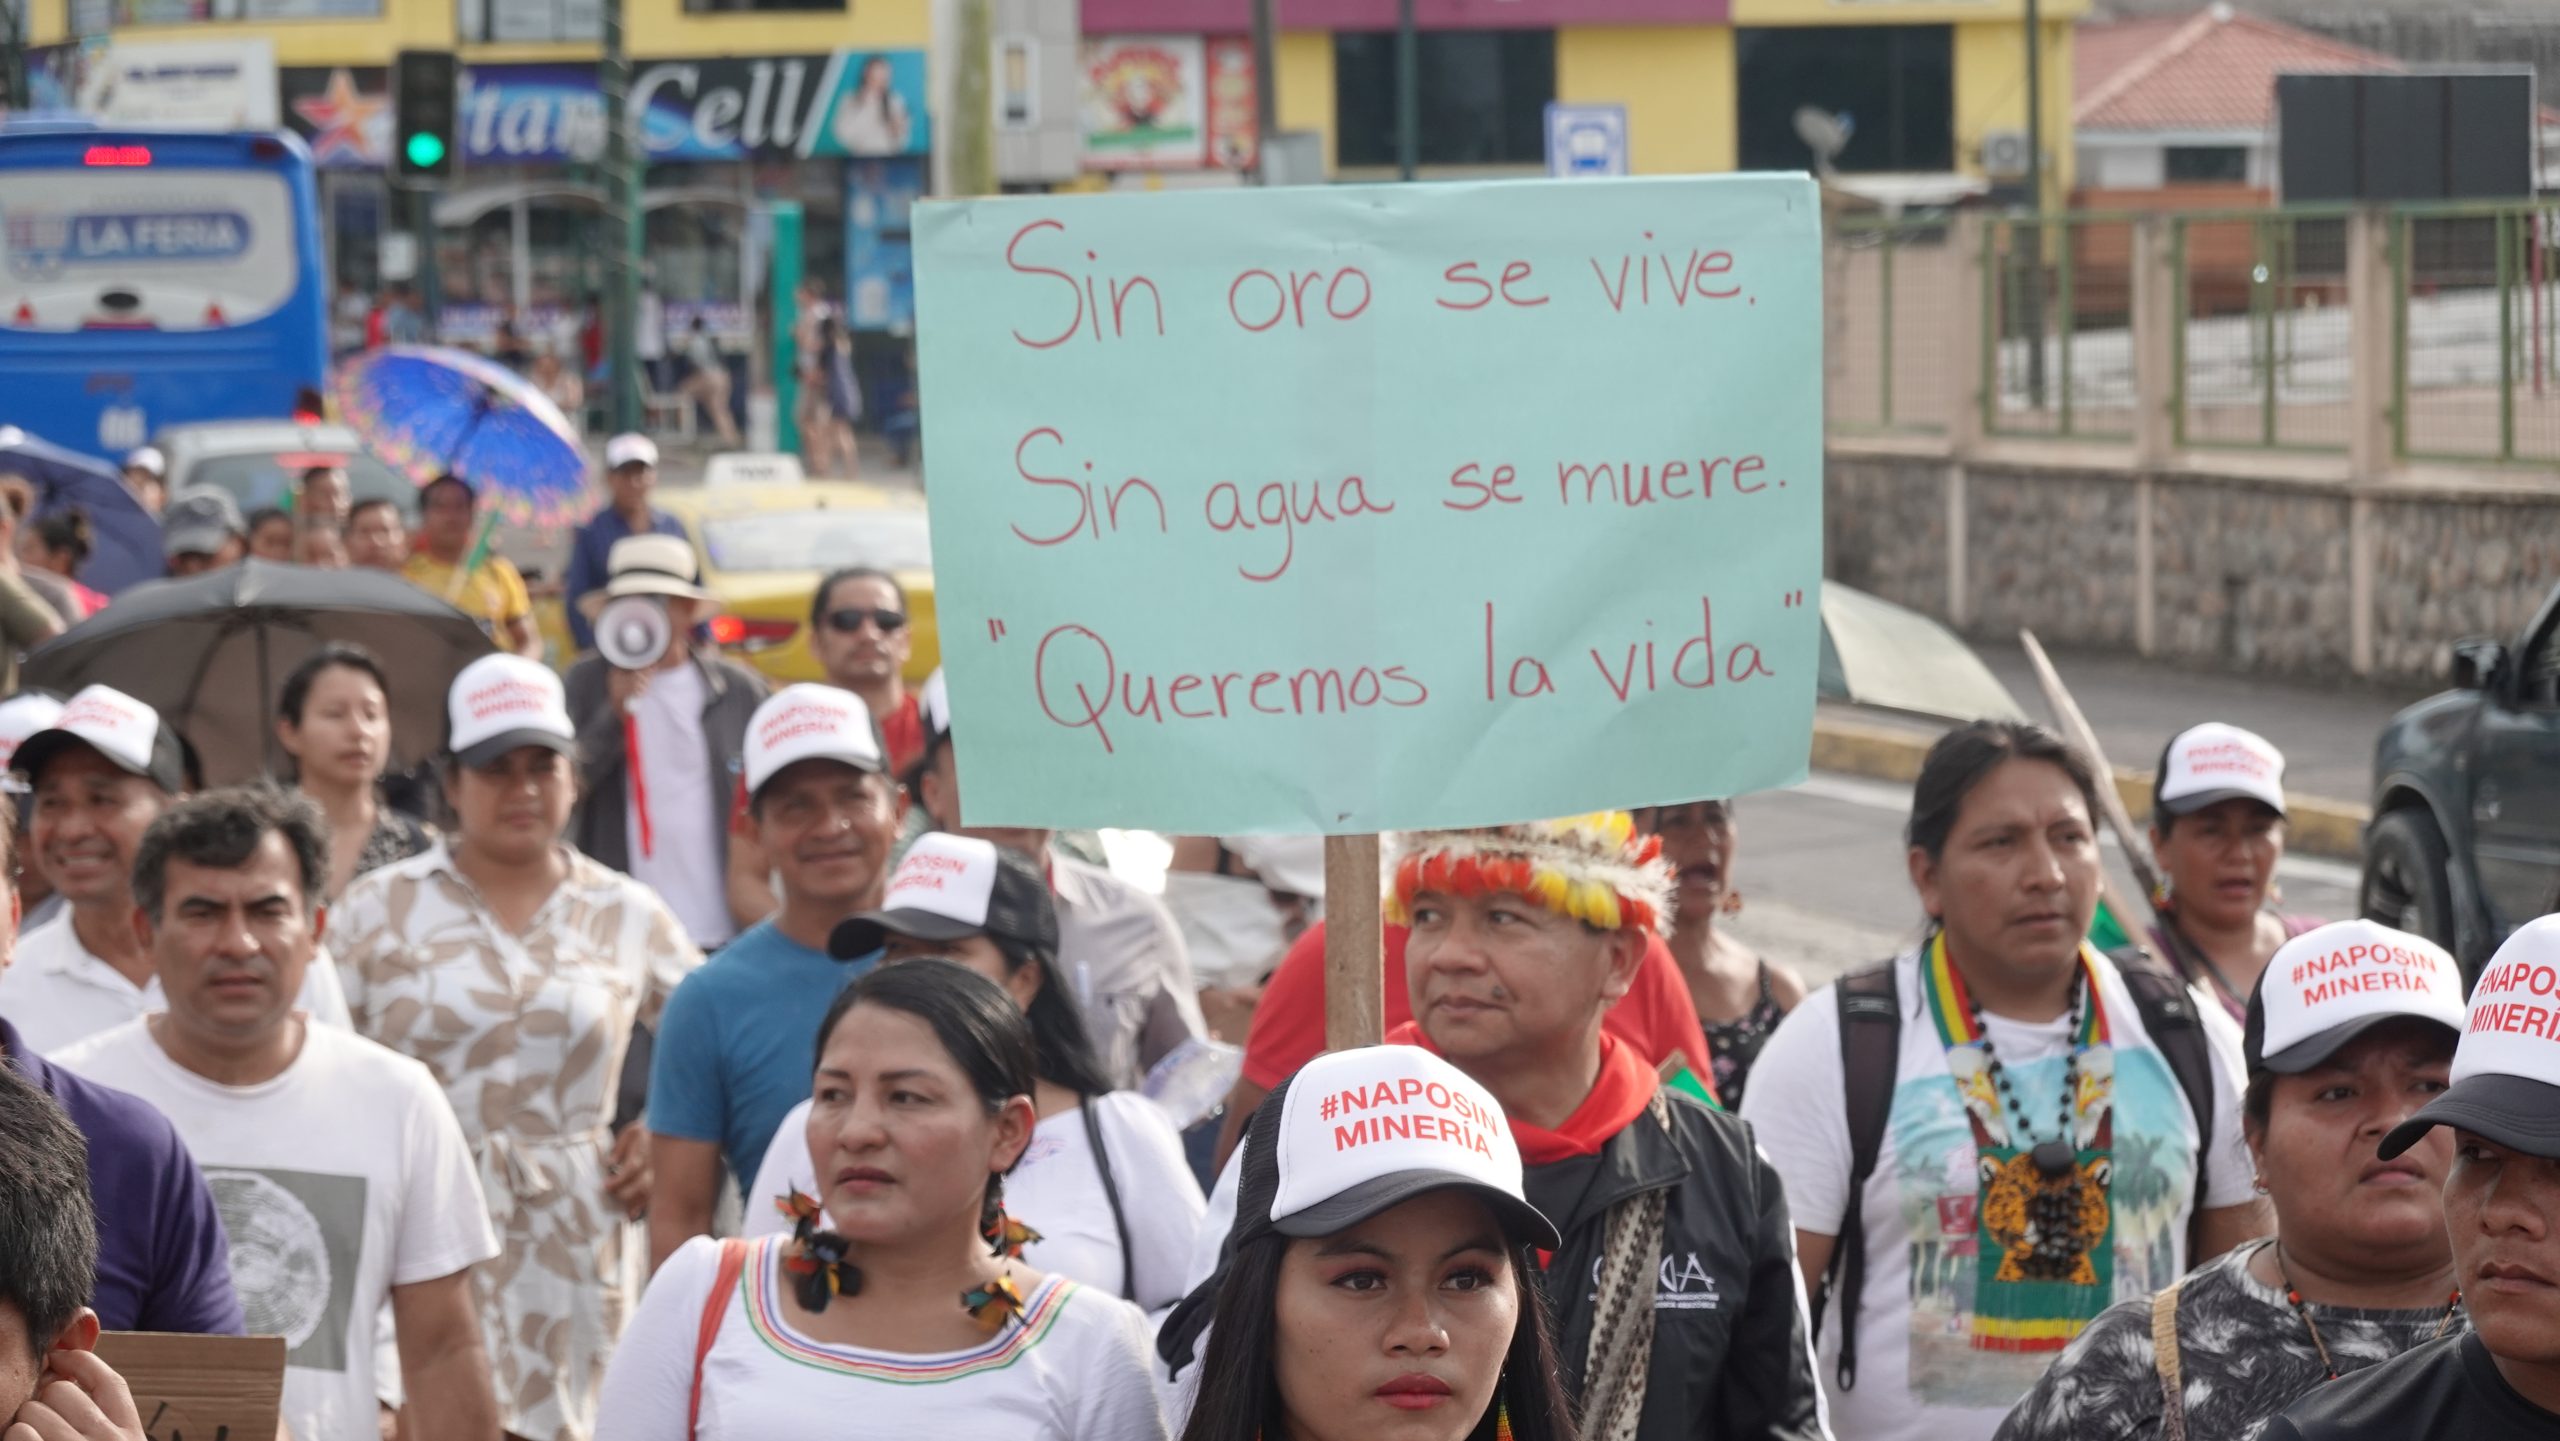 A protestor at a demonstration against illegal mining in Tena, Napo province, Ecuador, holds a sign saying "Without gold, we live. Without water, we die. We want to live"